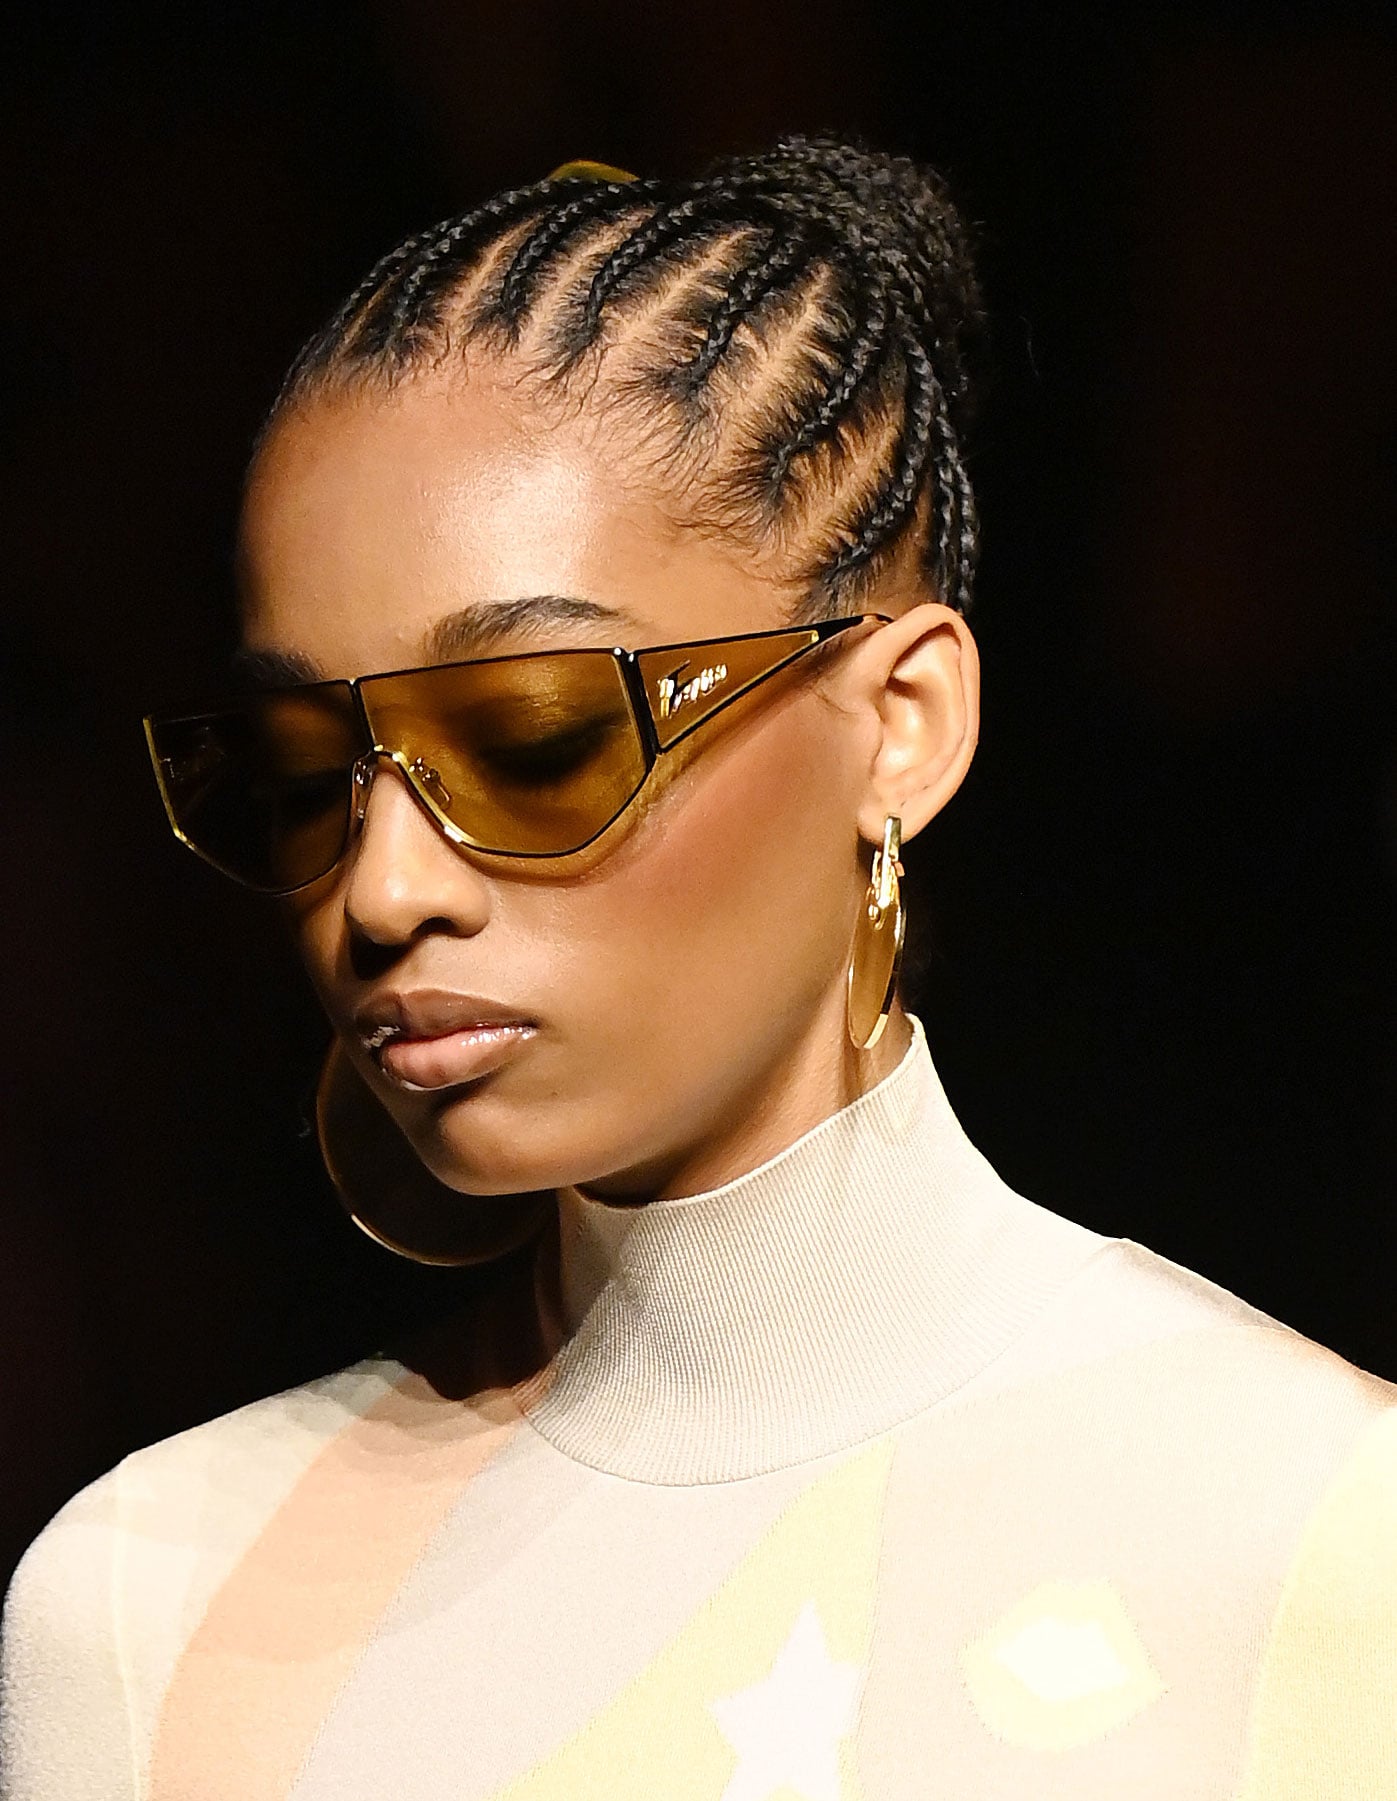 Braided Chignons at Fendi Spring 2022, Milan Fashion Week Spring 2022: The  Best Hair and Makeup Moments From the Runways